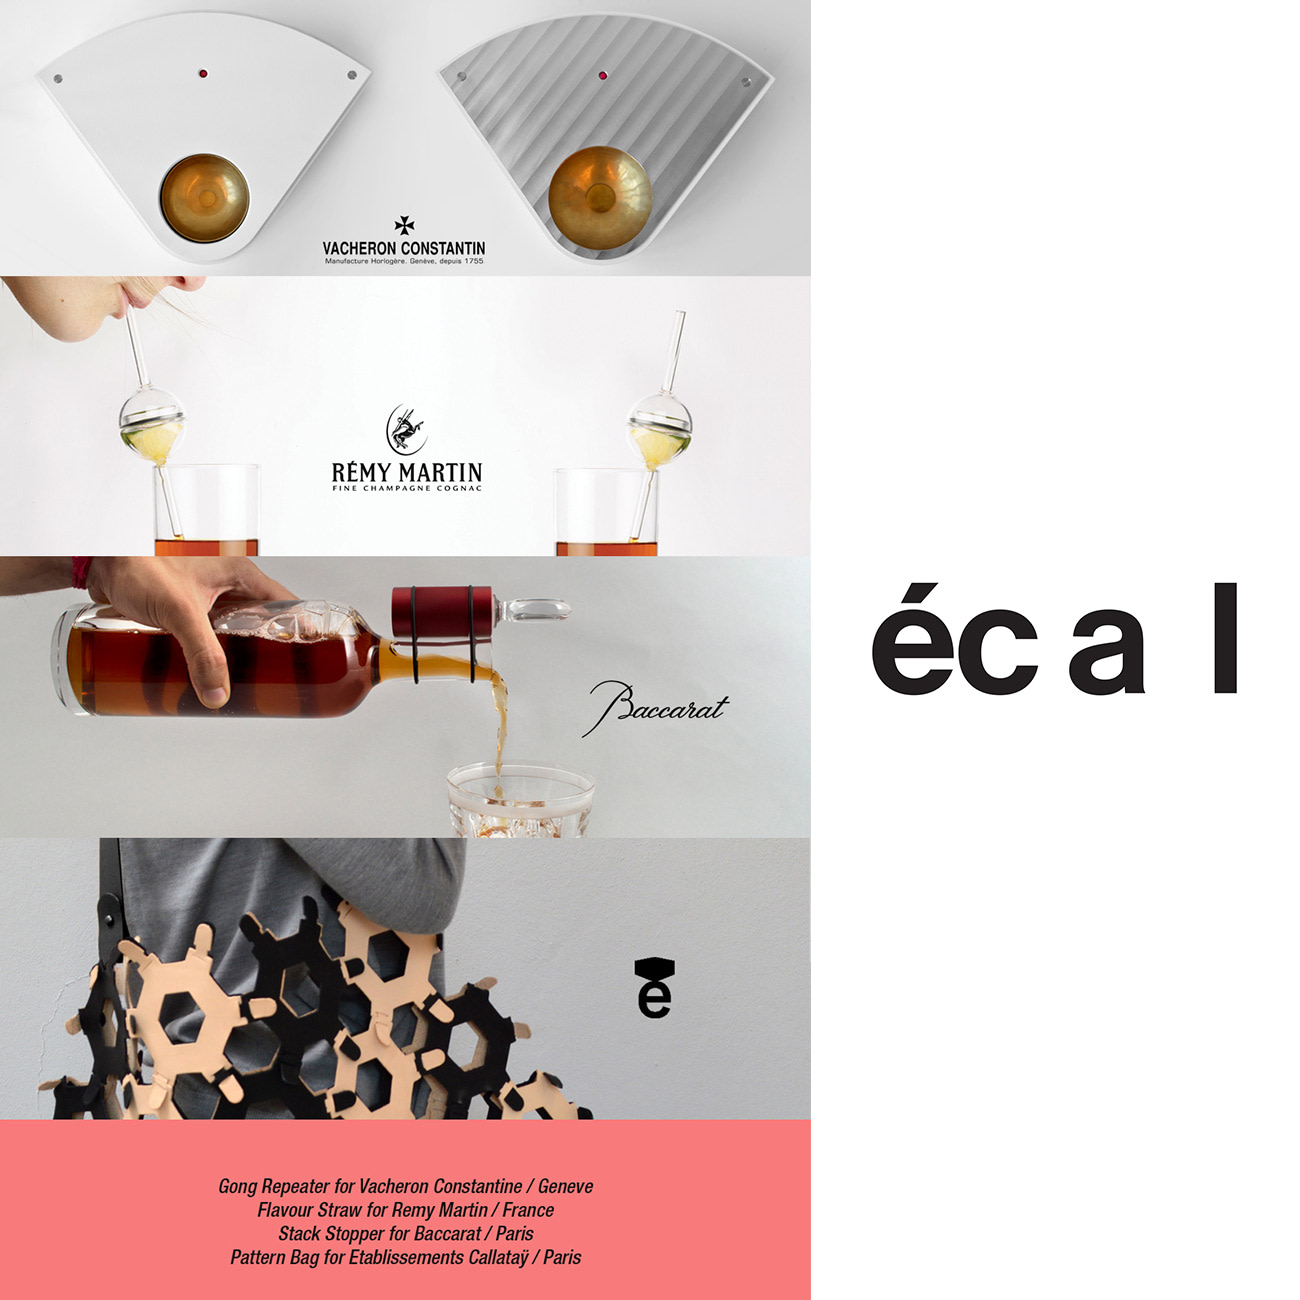 Jordi Pla Studio presents four new products designed at Ecal during the “Mas Luxe” for craftsman and luxurious companies like: Vacheron Constantin from Geneve. Baccarat from Paris, Remy Martin from France and Etablissements Calataÿ from Paris.